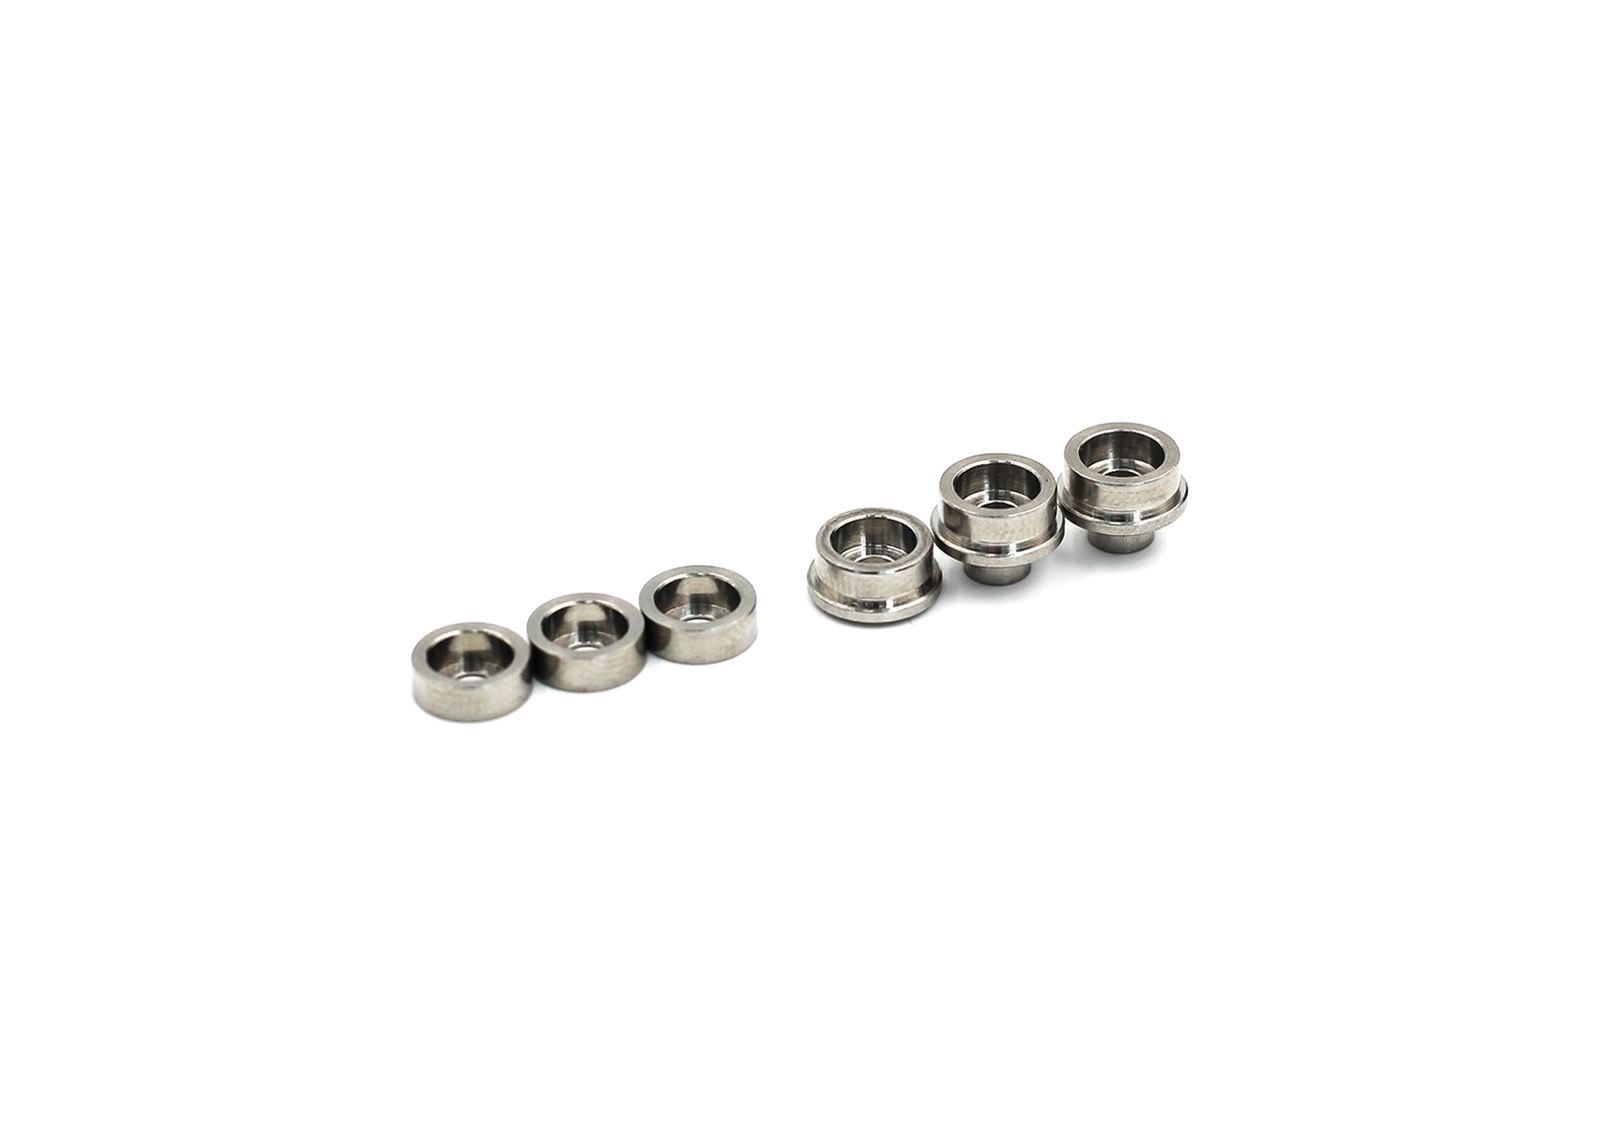 Stainless Bushing for Madular Gear Set - SMOOTH 7mm (6pcs) - Modify Airsoft parts